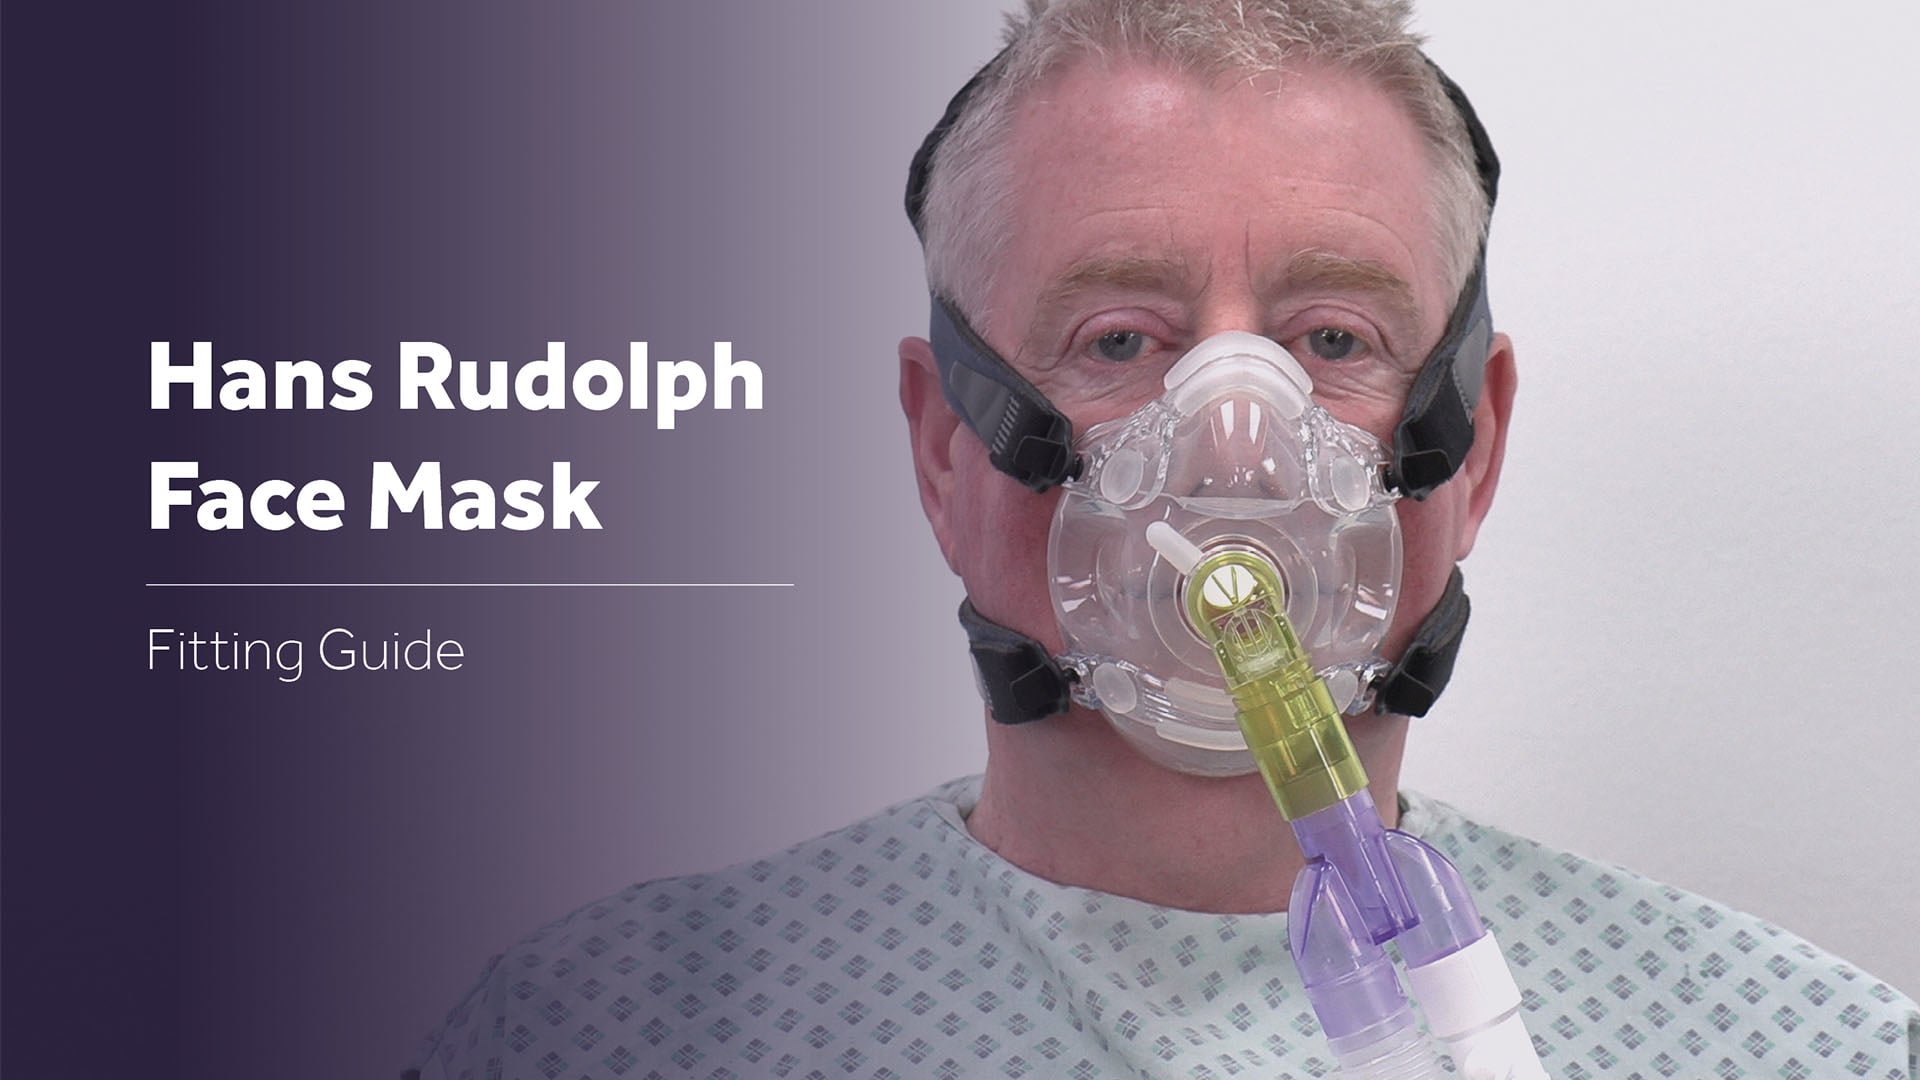 Hans Rudolph Face Mask Fitting Guide